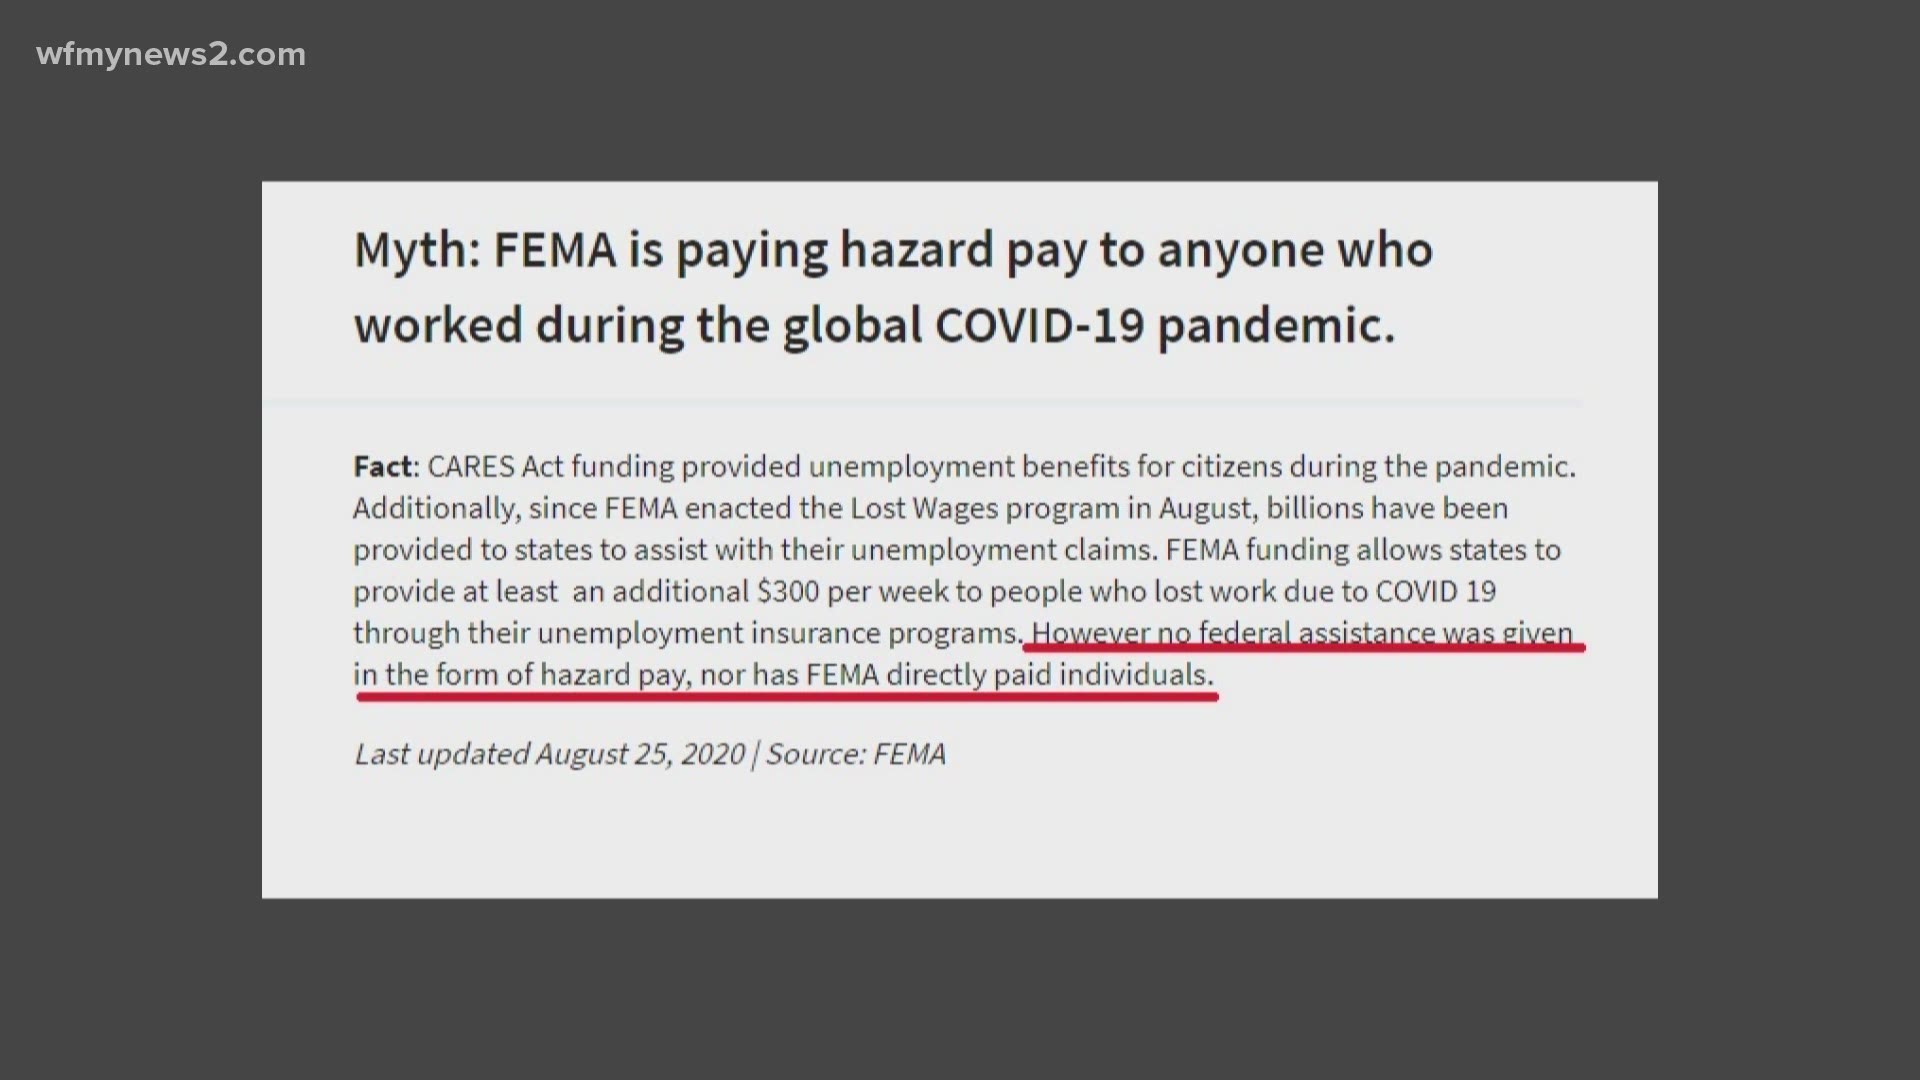 The fact is FEMA is helping to pay unemployment claims but no federal assistance was given in the form of hazard pay nor has FEMA directly paid individuals.